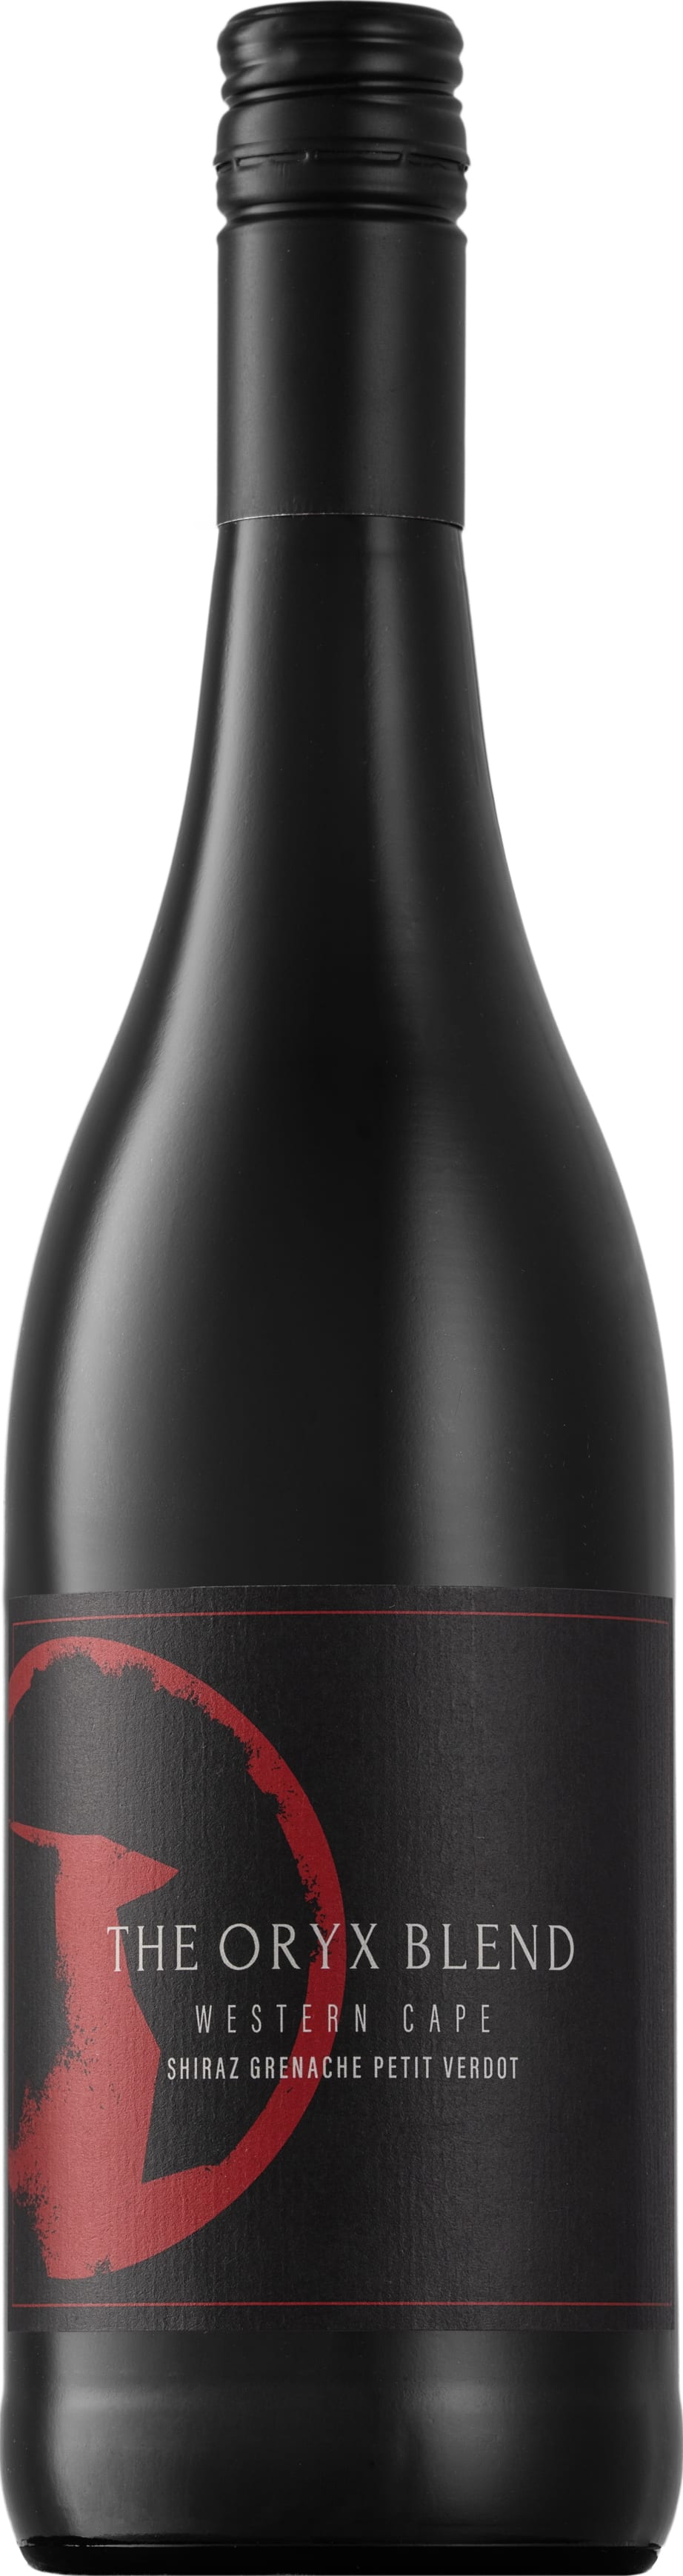 Thelema Mountain Vineyards Oryx Shiraz Grenache Petit Verdot 2019 75cl - Buy Thelema Mountain Vineyards Wines from GREAT WINES DIRECT wine shop